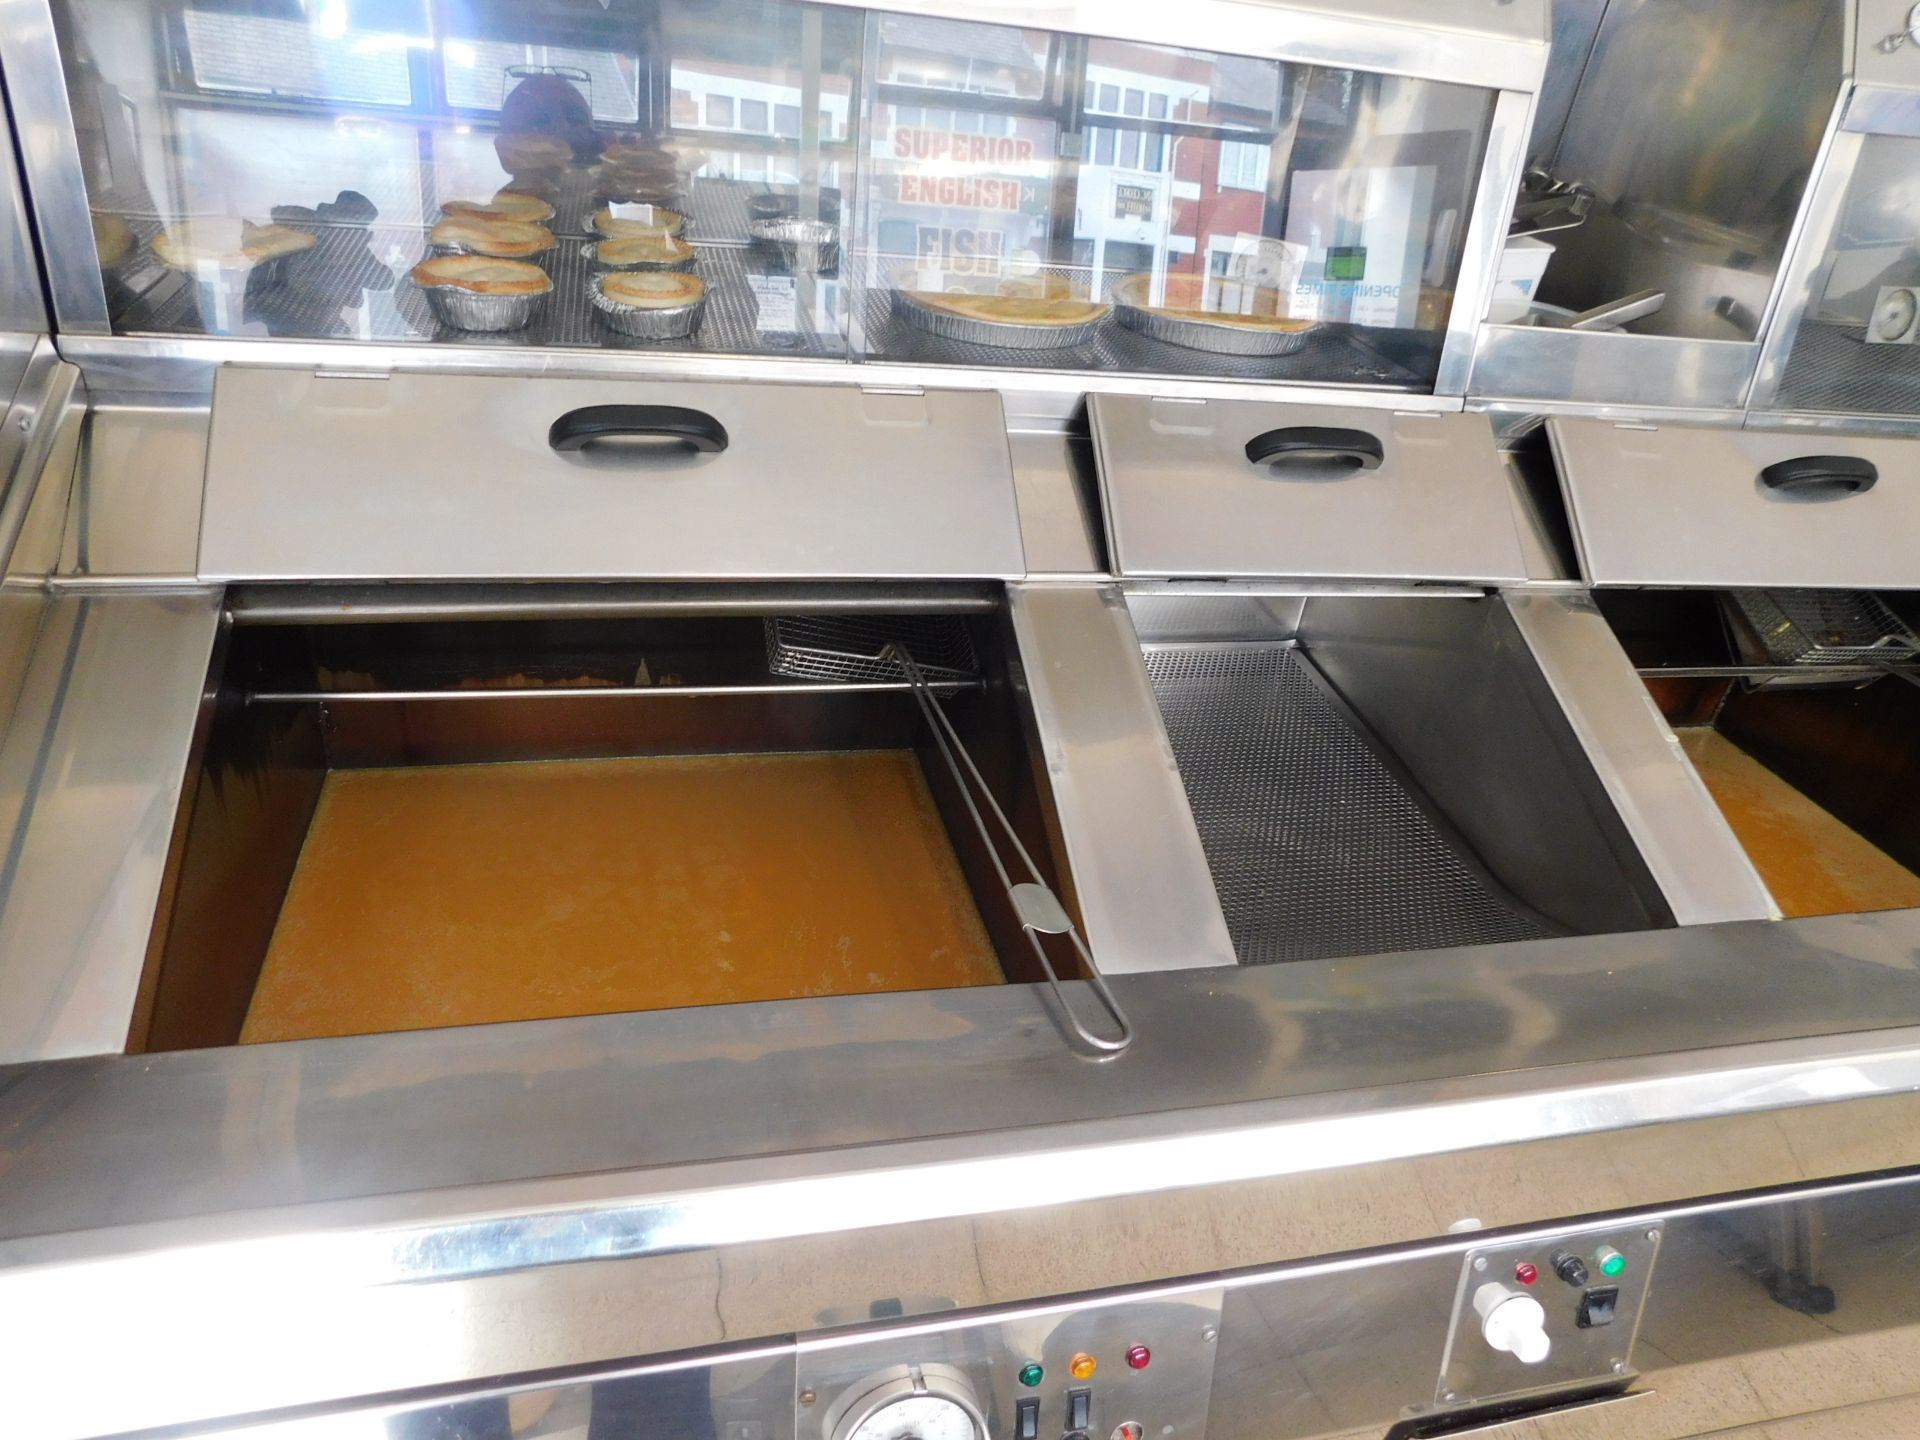 Stainless Steel Chip Fryer & Warming Range, 259cm x 108cm x 148cm (Buyer to Provide Qualified - Image 3 of 8